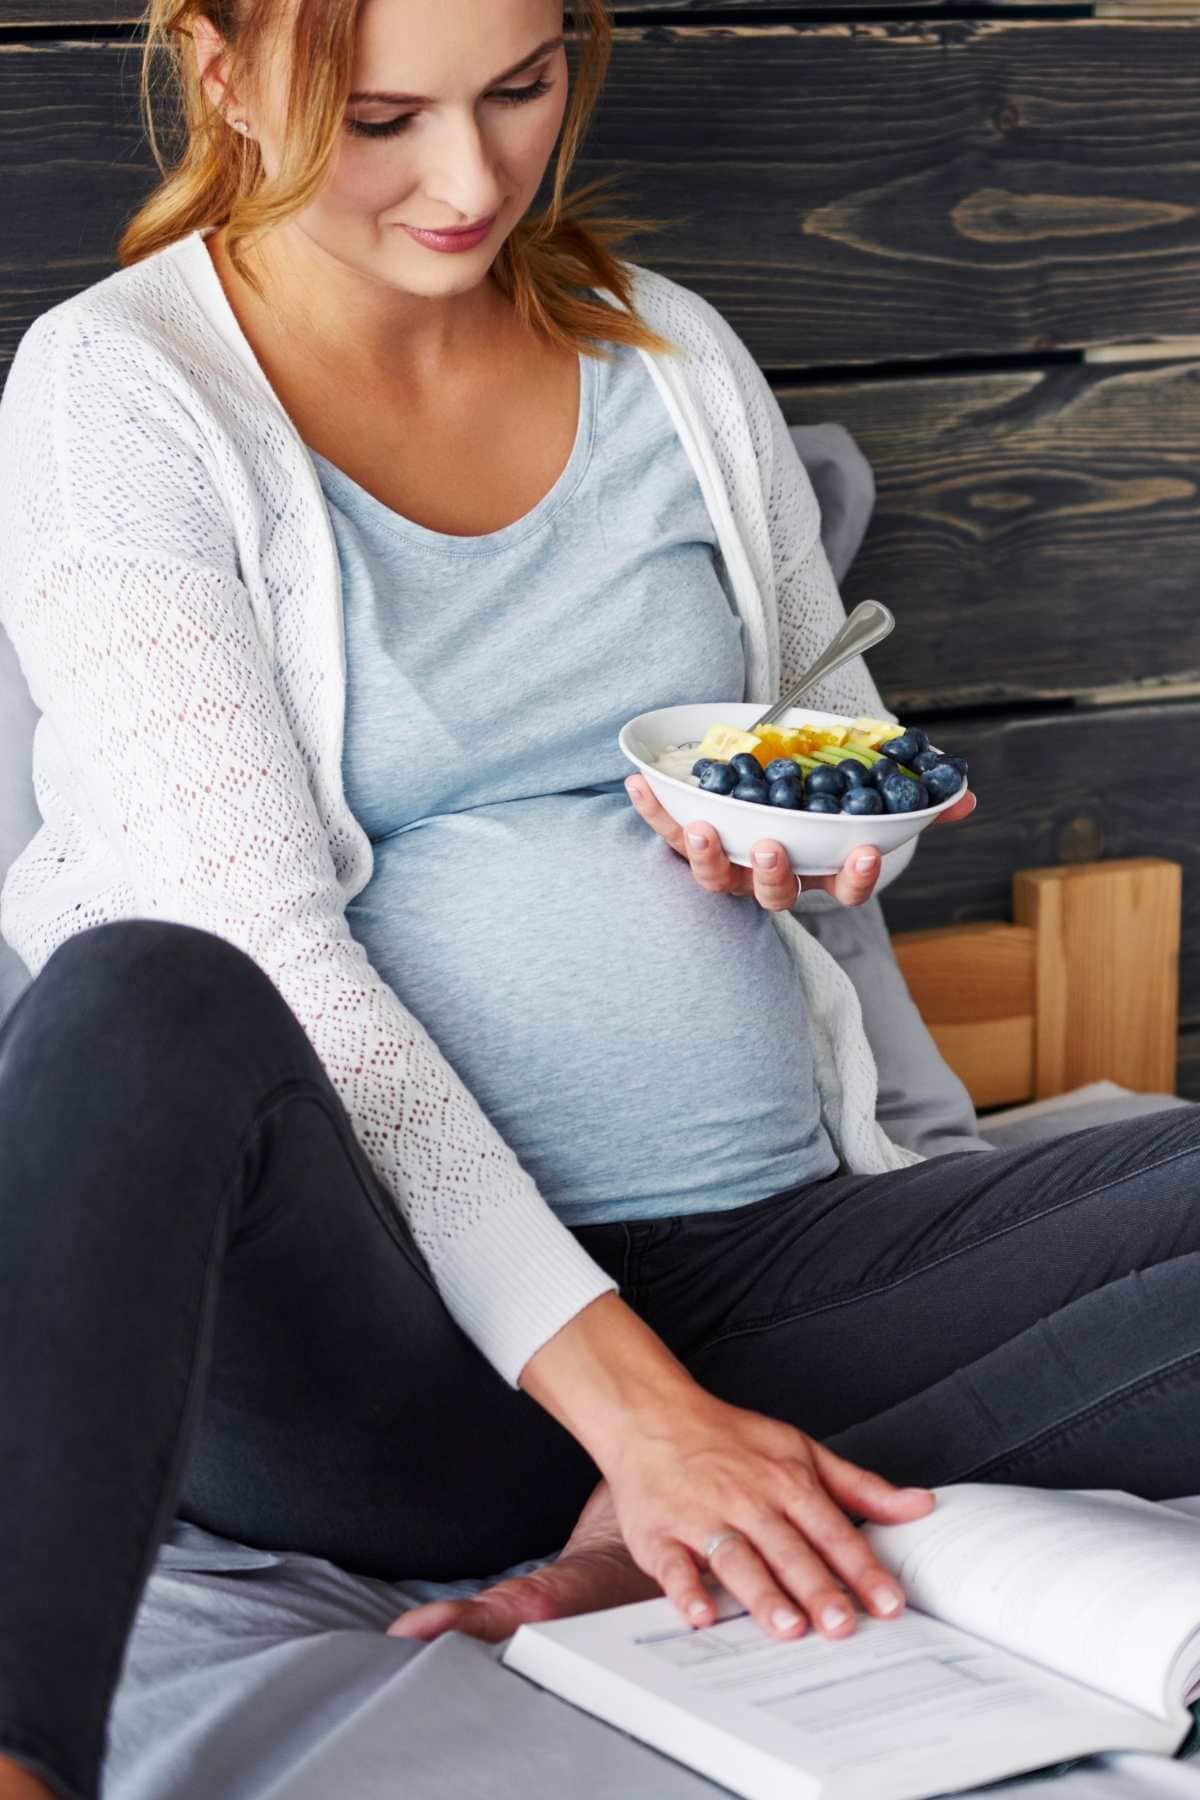 There's a whole big list of foods you can't eat, but have you considered the foods you should be eating during pregnancy? They're super tasty and nutritious too. 